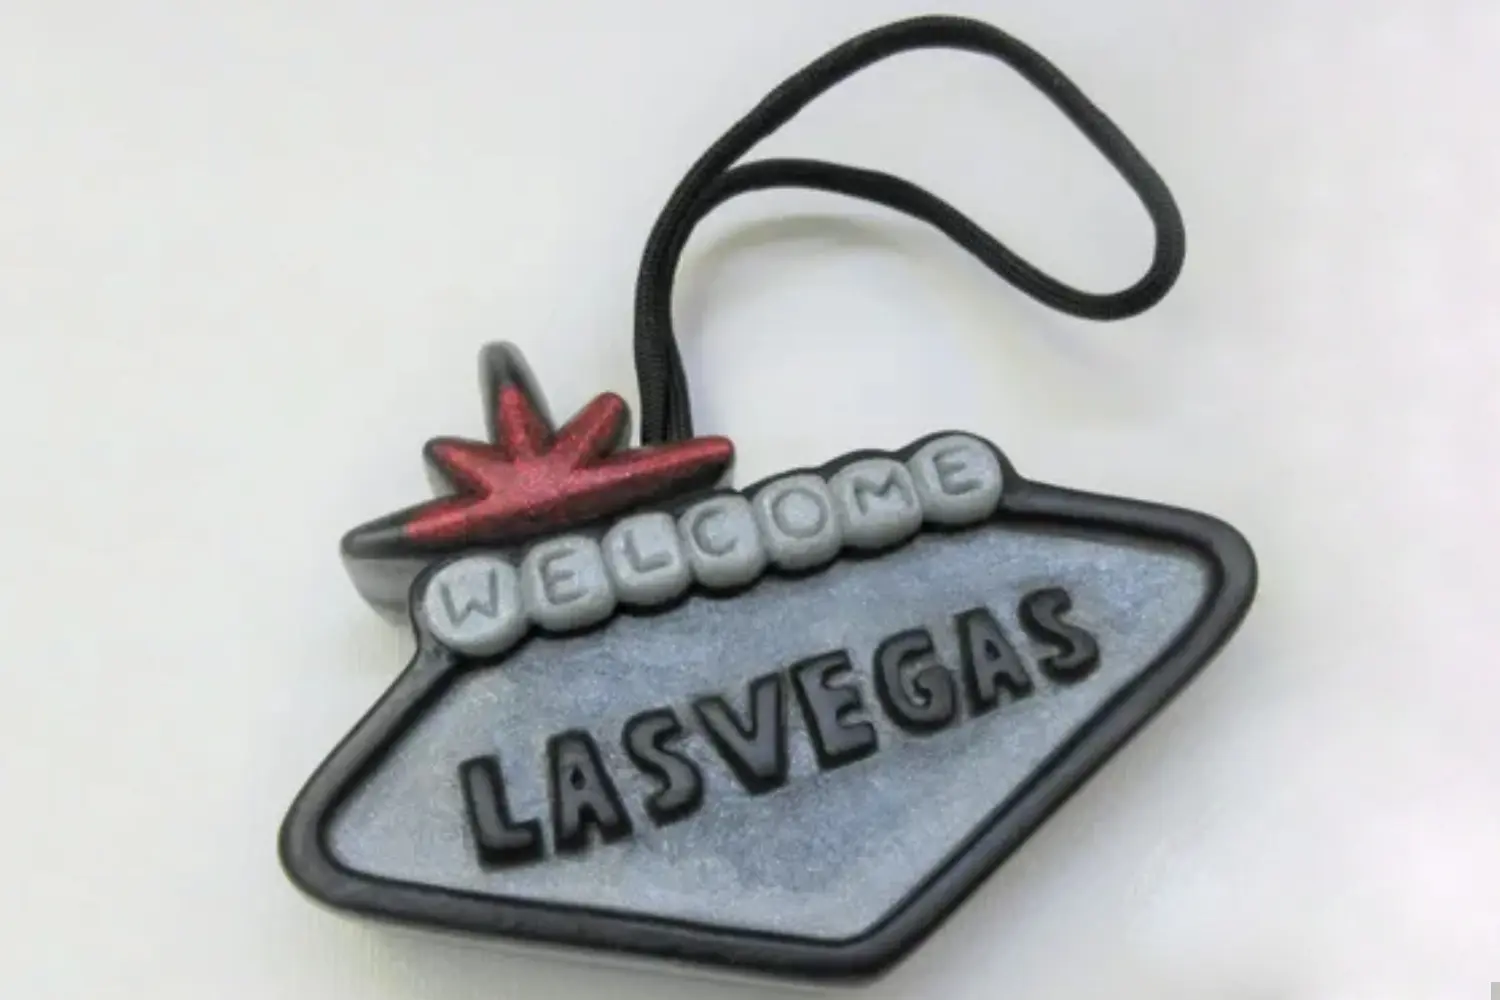 A las vegas sign with the word " welcome " on it.